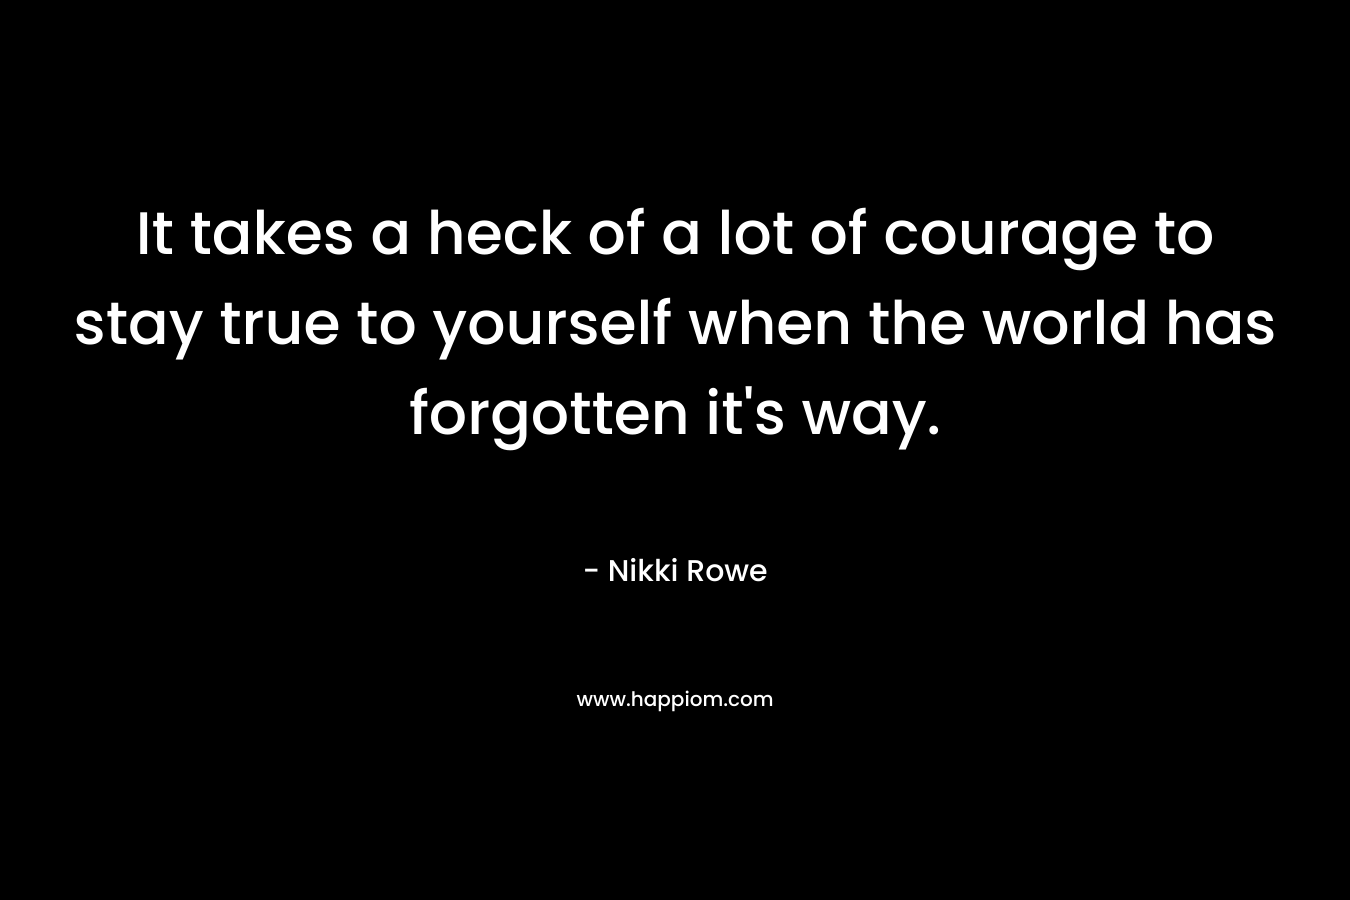 It takes a heck of a lot of courage to stay true to yourself when the world has forgotten it's way.